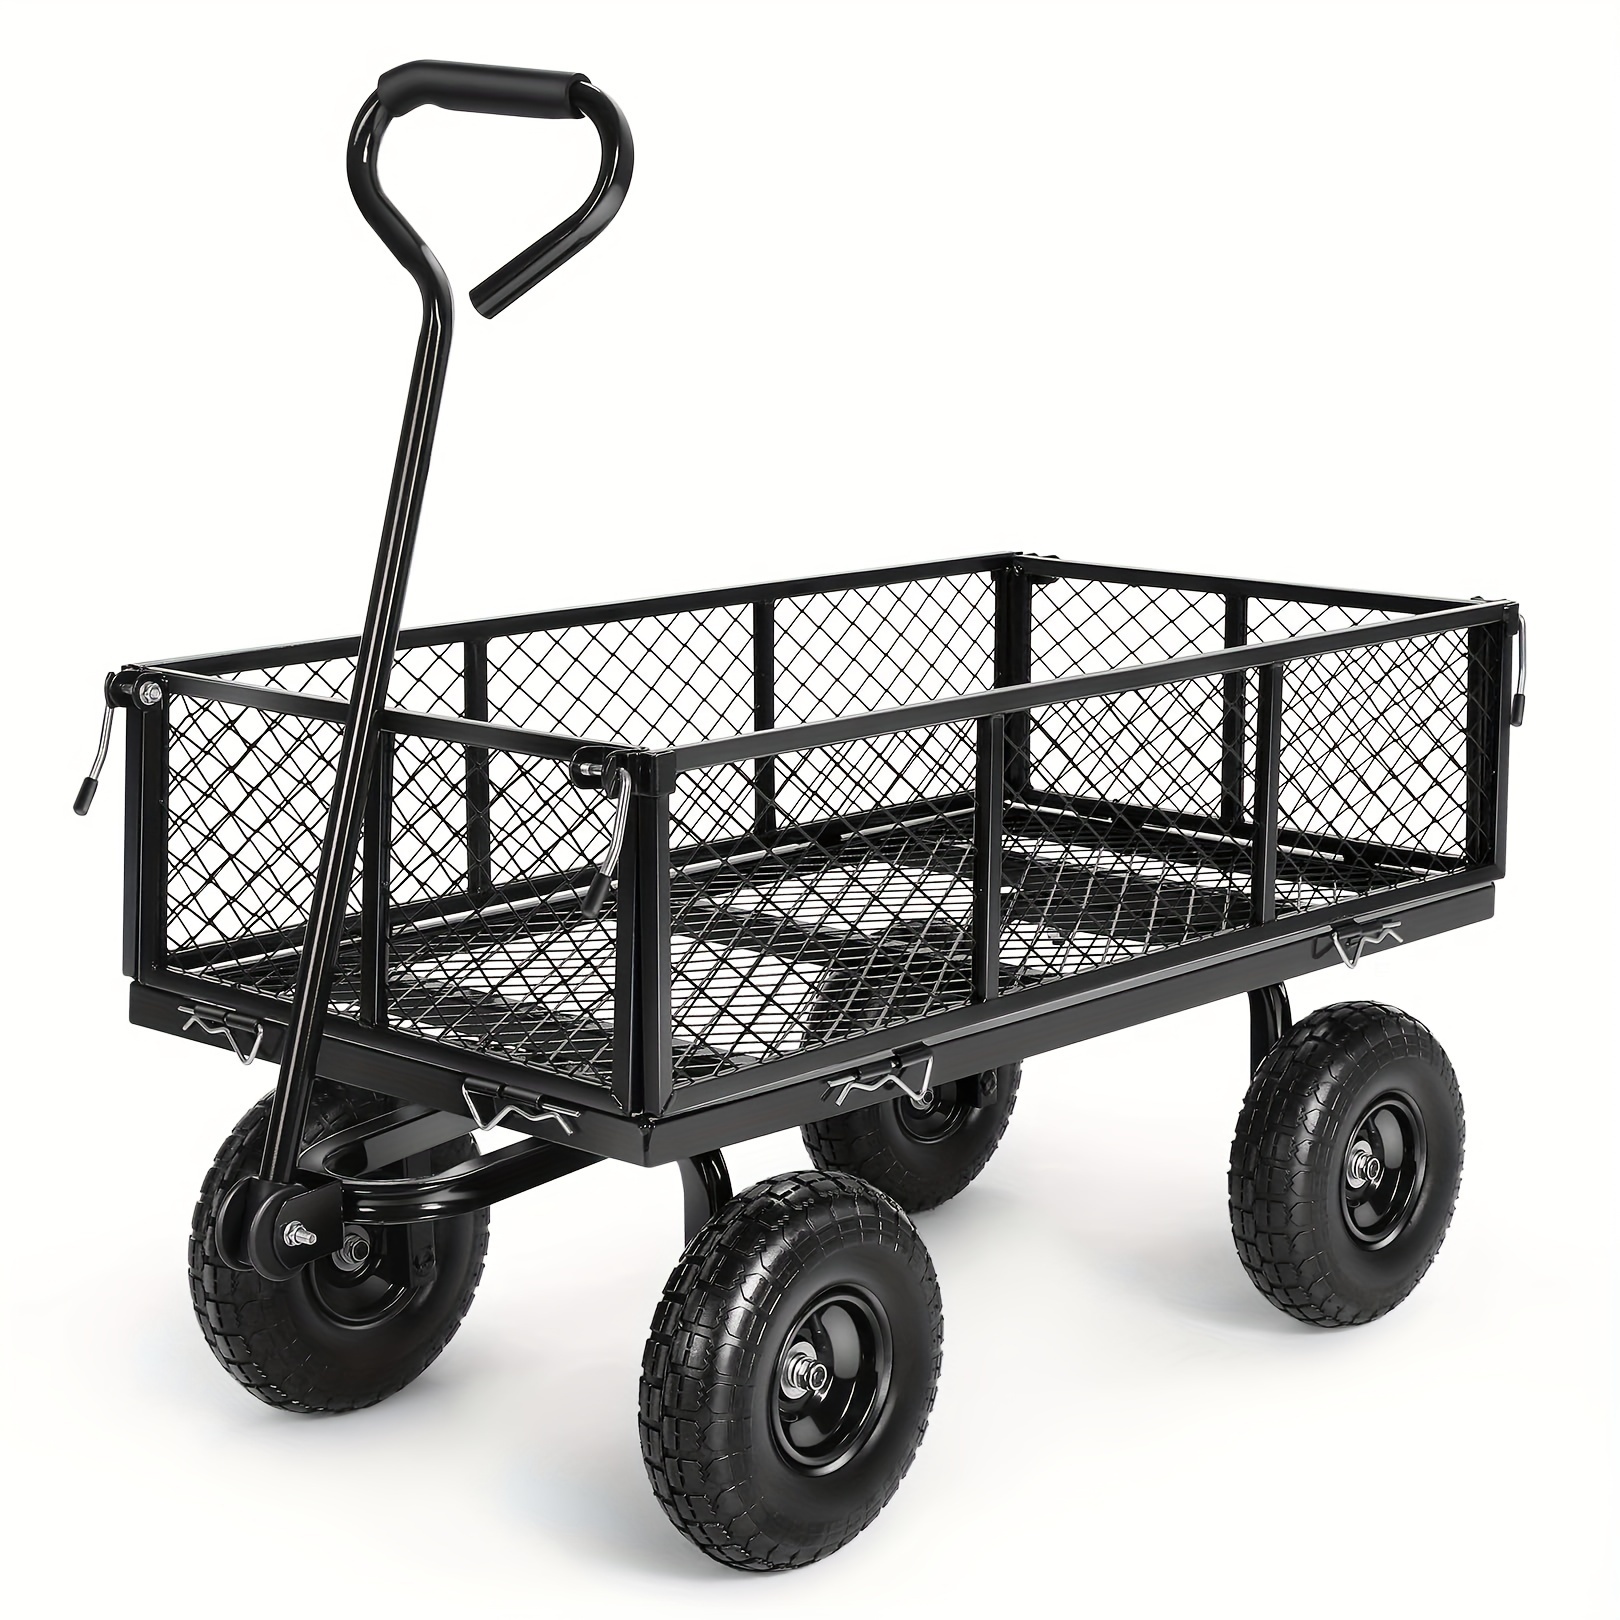 

Homdox, Steel Garden Cart, 680 Lbs Capacity, Convertible To Flatbed, Removable Mesh Sides, 180° Rotating Handle, Suitable For Transporting Goods, Shopping, Watering Plants, Etc.